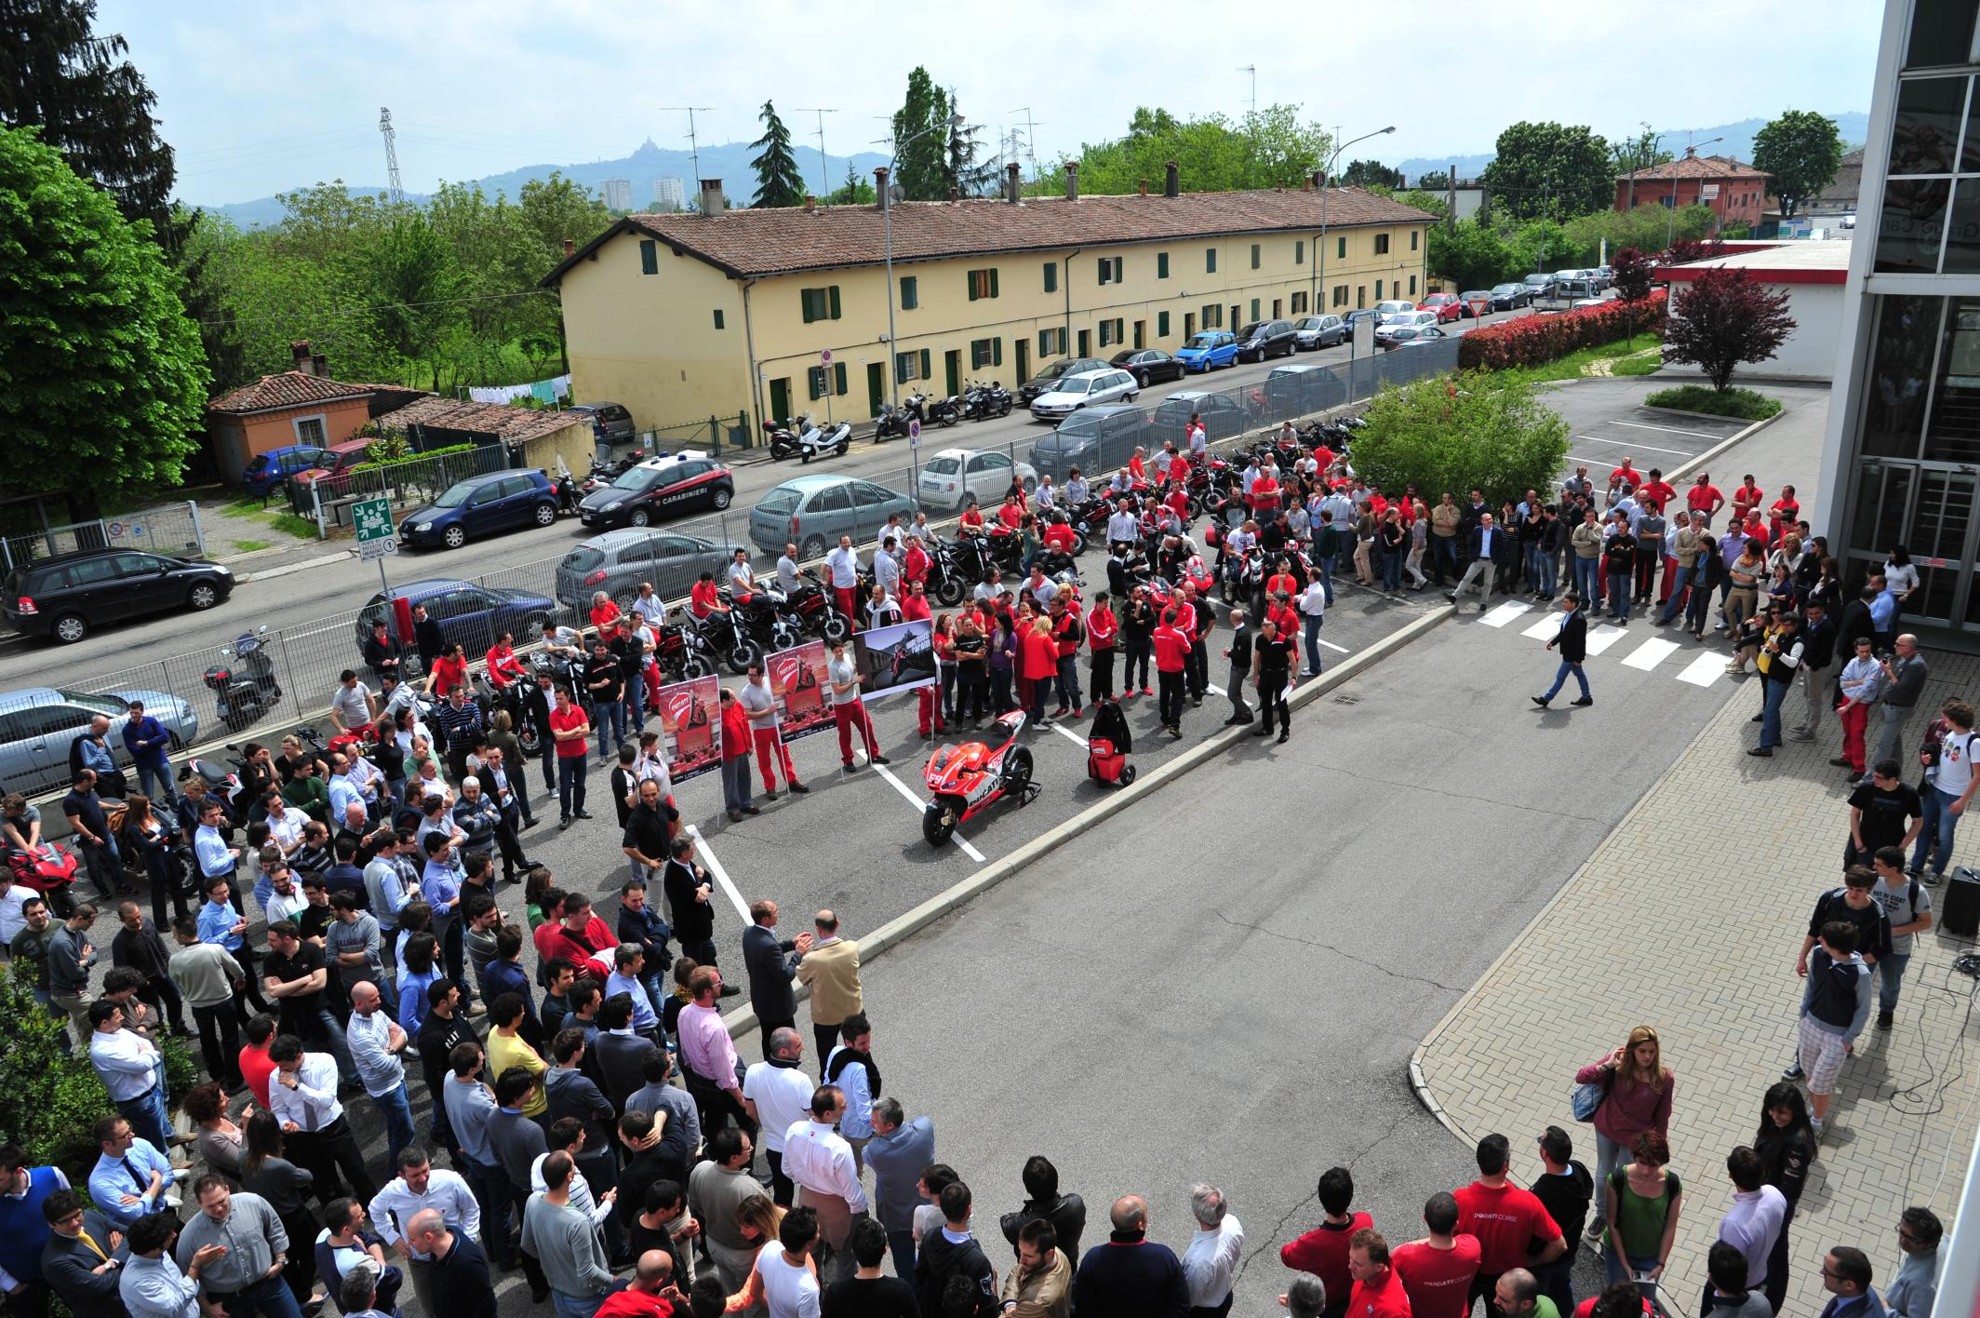 DUCATI REVS-UP A PASSIONATE WELCOME FOR NEW CEO, CLAUDIO DOMENICALI